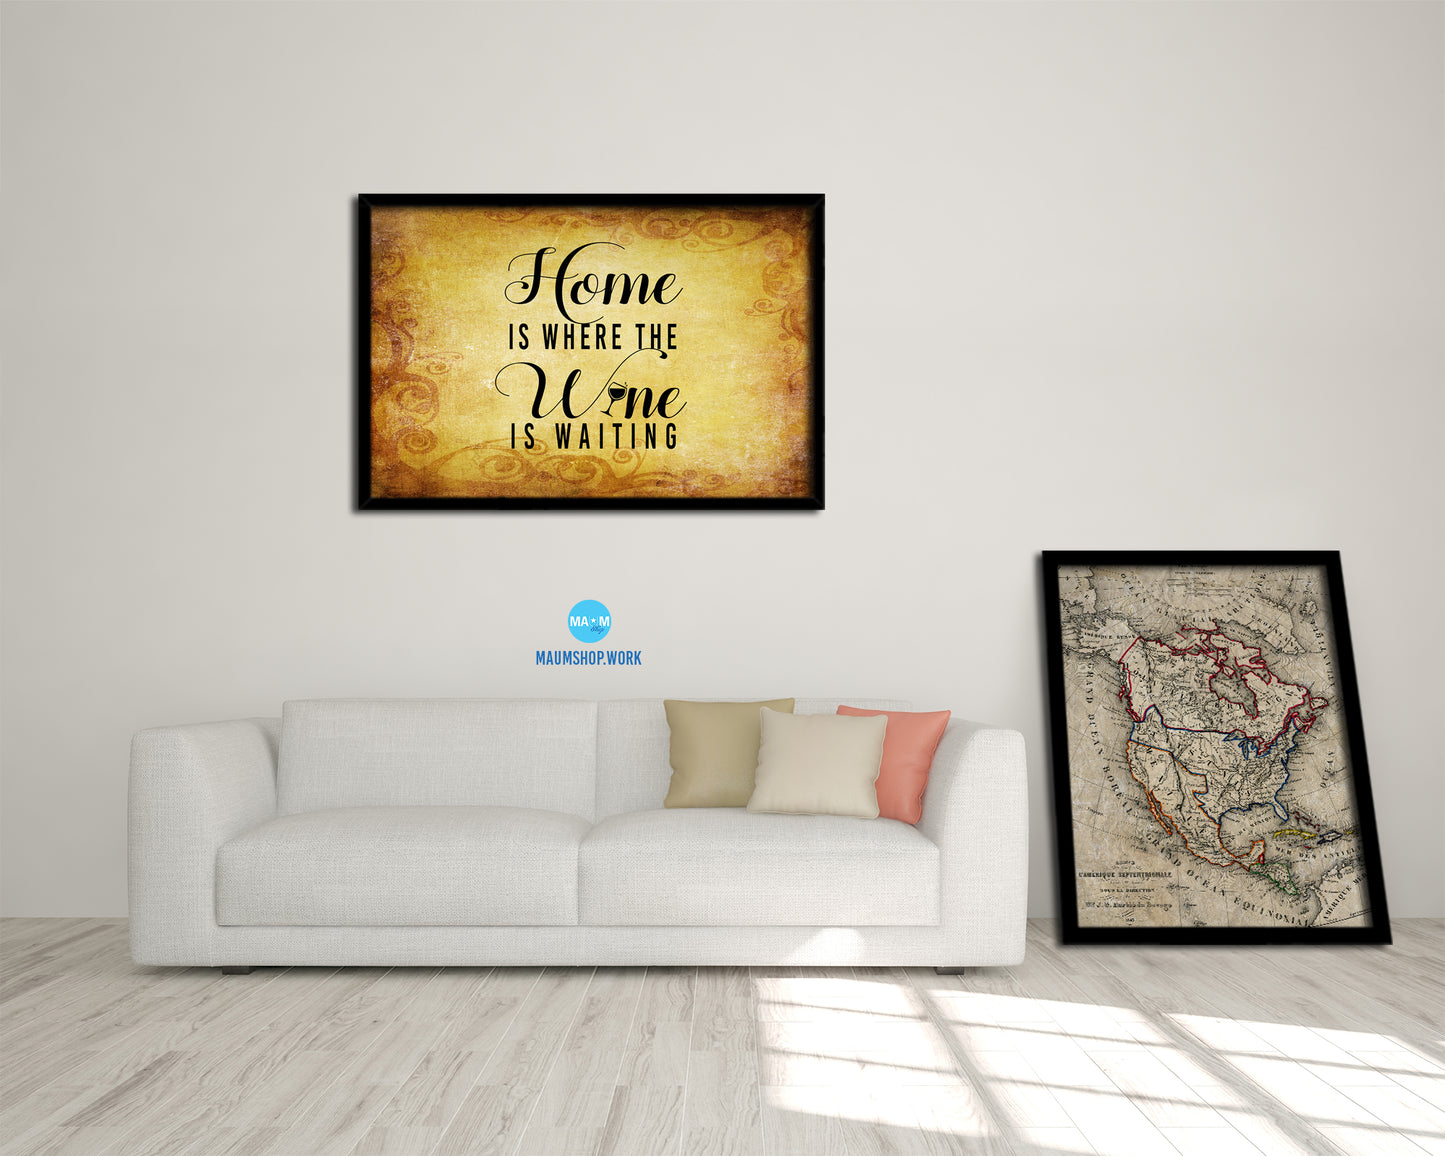 Home is where the w*n is waiting Quote Framed Print Wall Decor Art Gifts